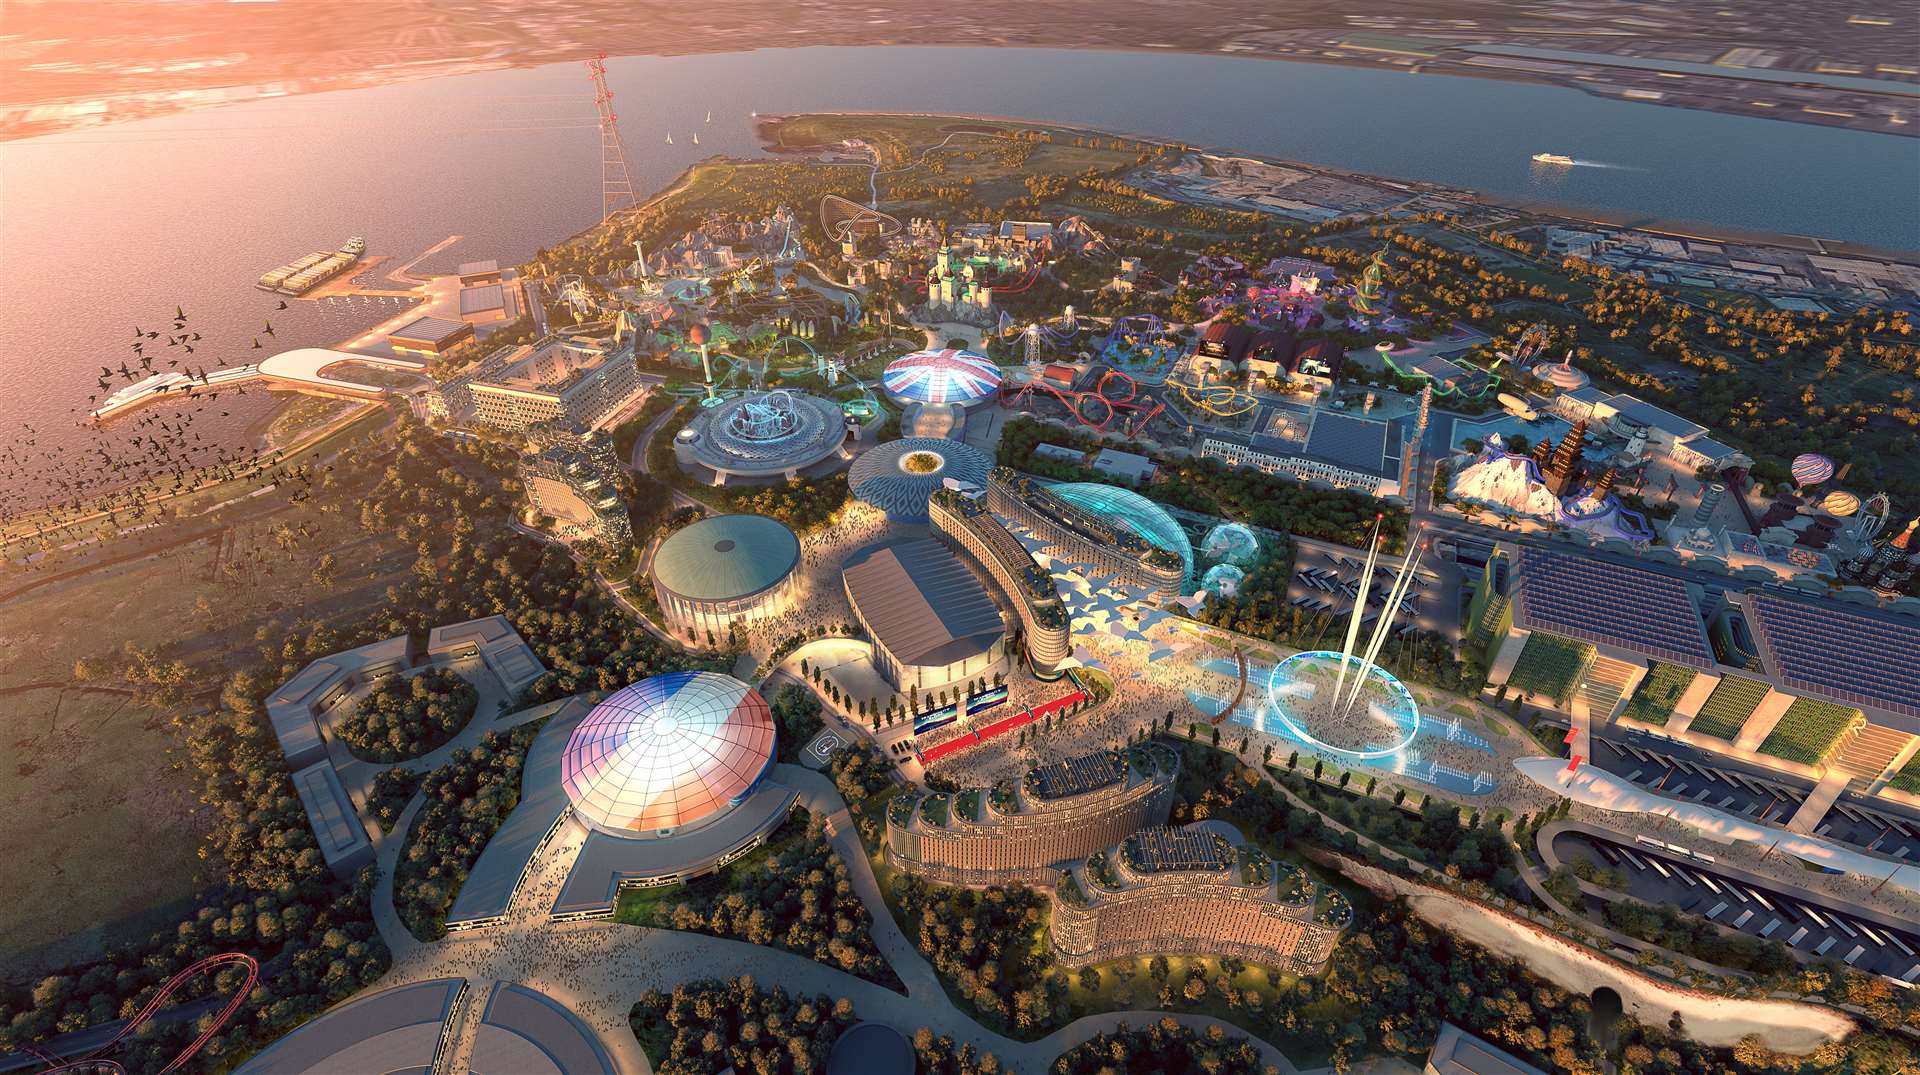 The latest artist's impression of what the London Resort theme park could look like